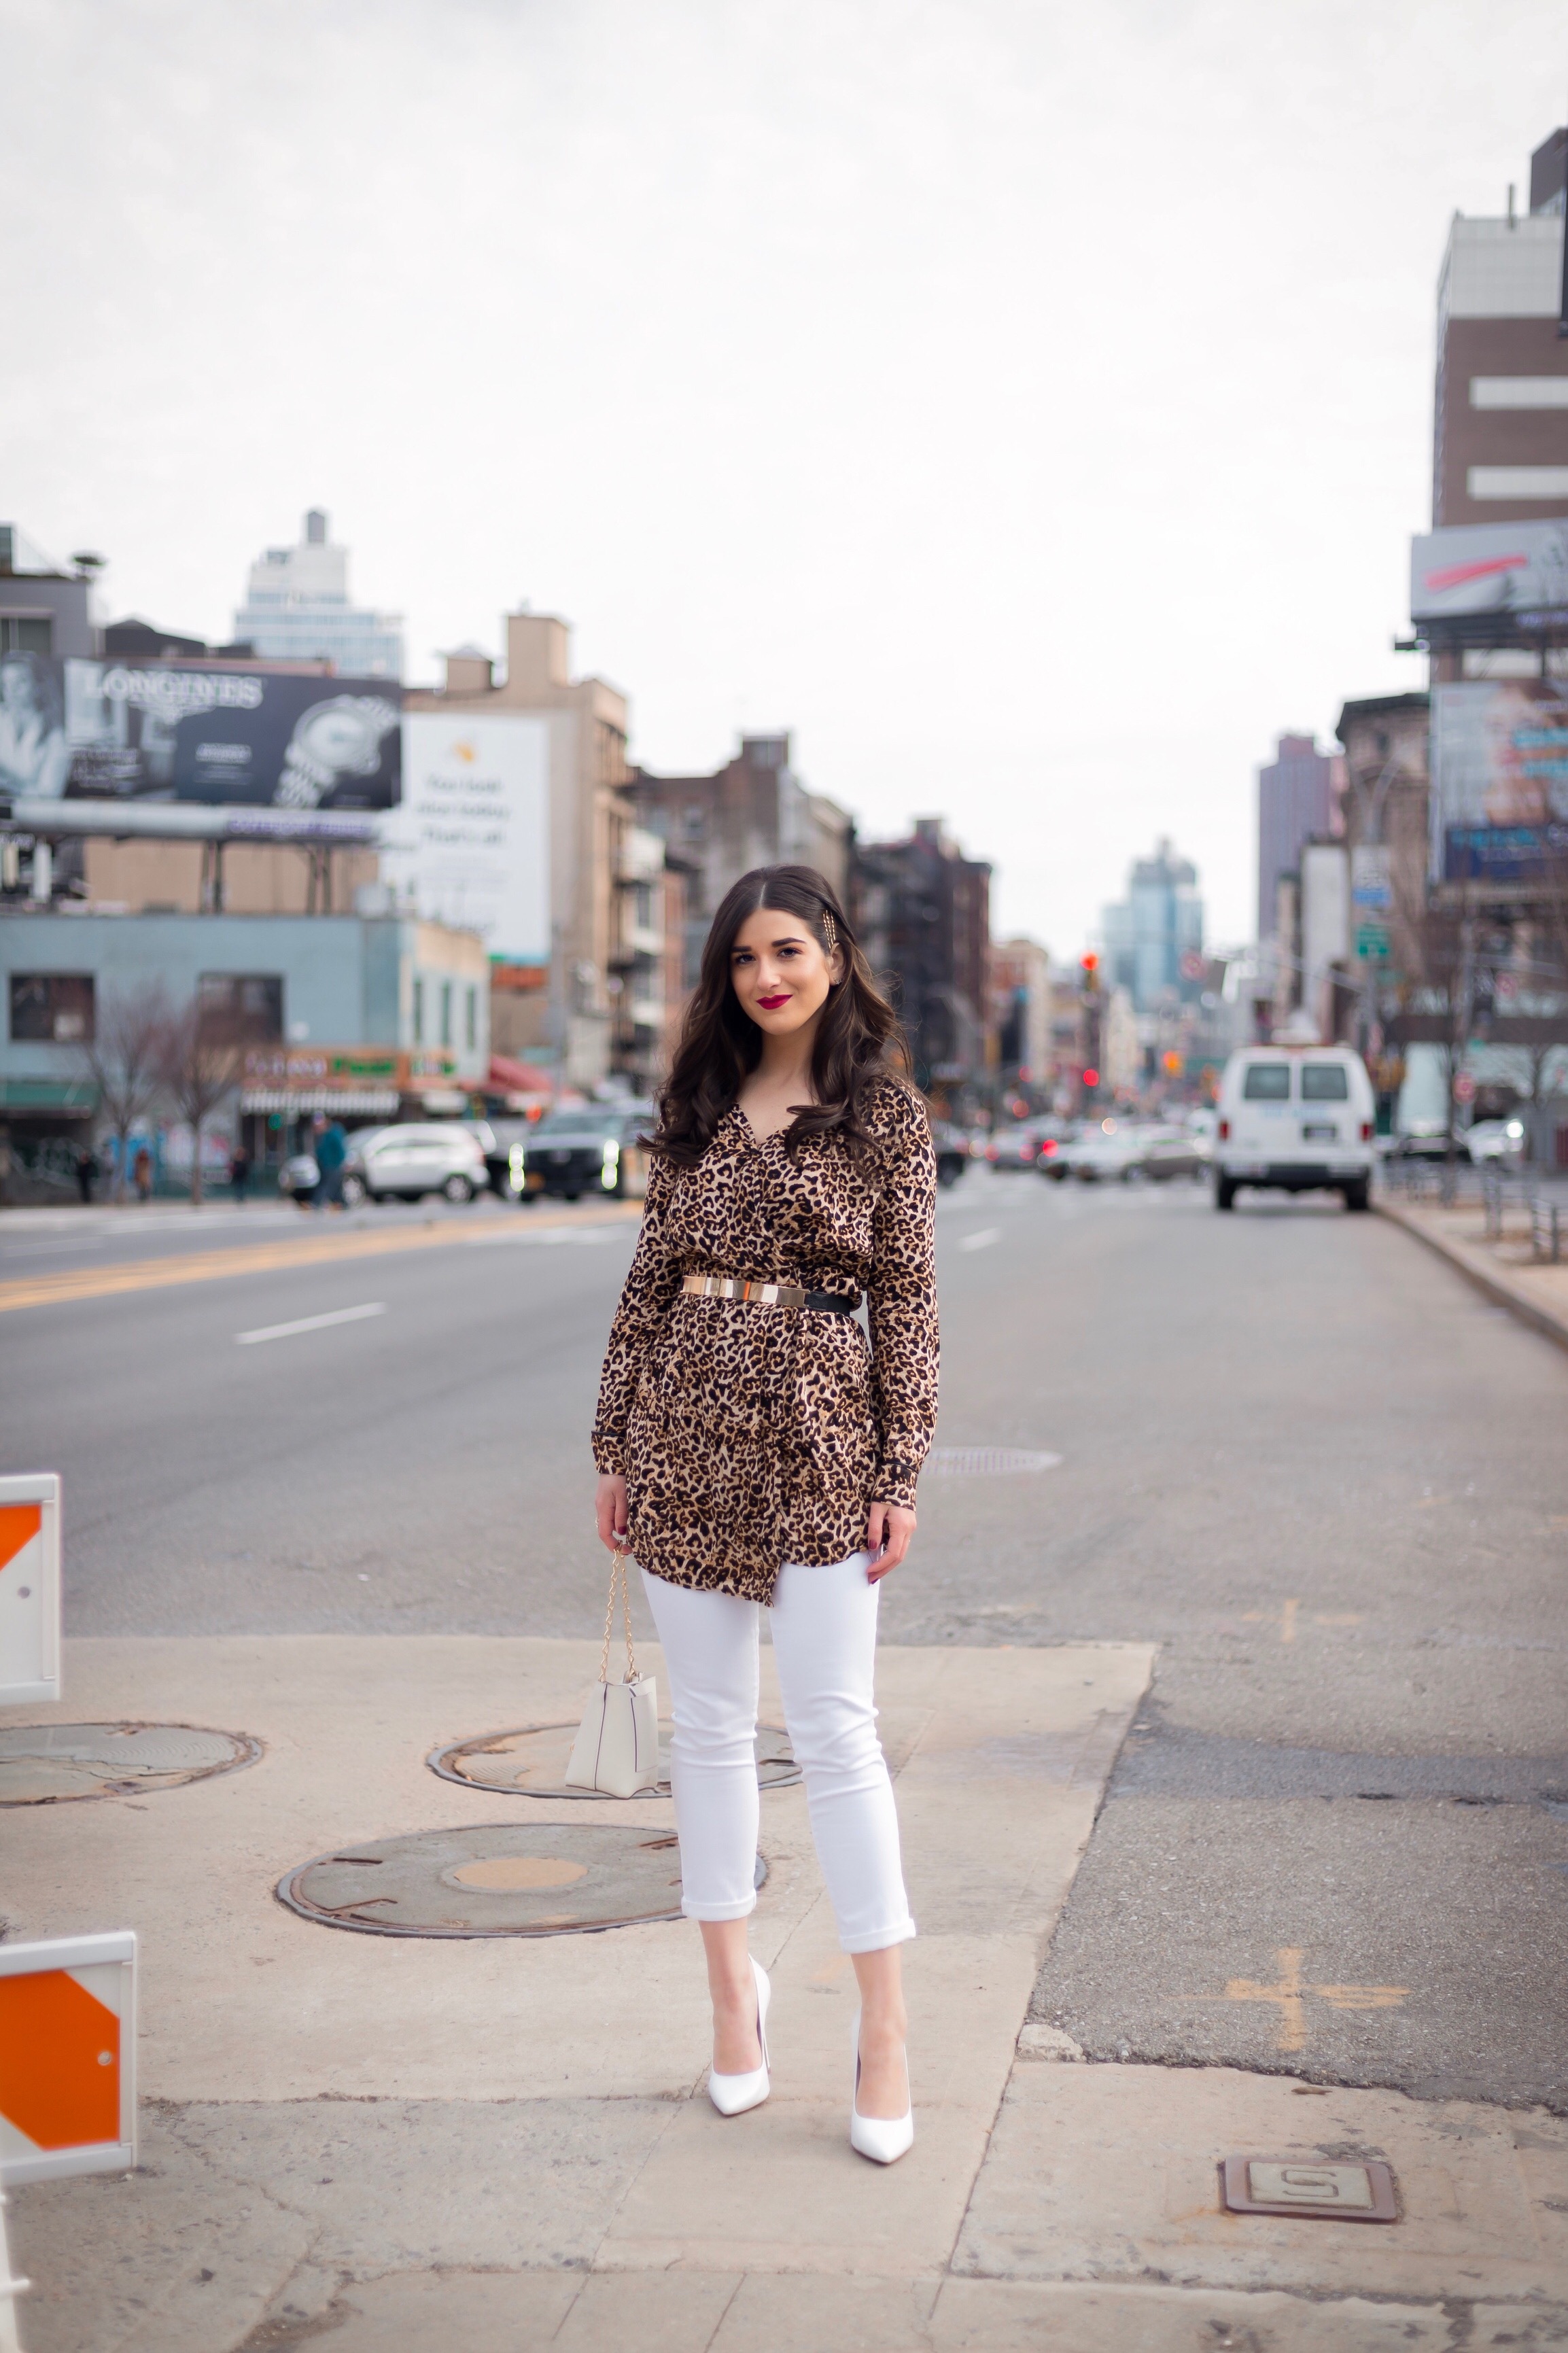 Dressing Up My Democracy Denim Esther Santer Fashion Blog NYC Street Style Blogger Outfit OOTD Trendy Shopping White Jeans Leopard Top Coat Inspo Bobby Pins Hair Trend White Heels Wear Chaya Ross Photography Inspiration Cream Chain Small Bag Gold Belt.jpg